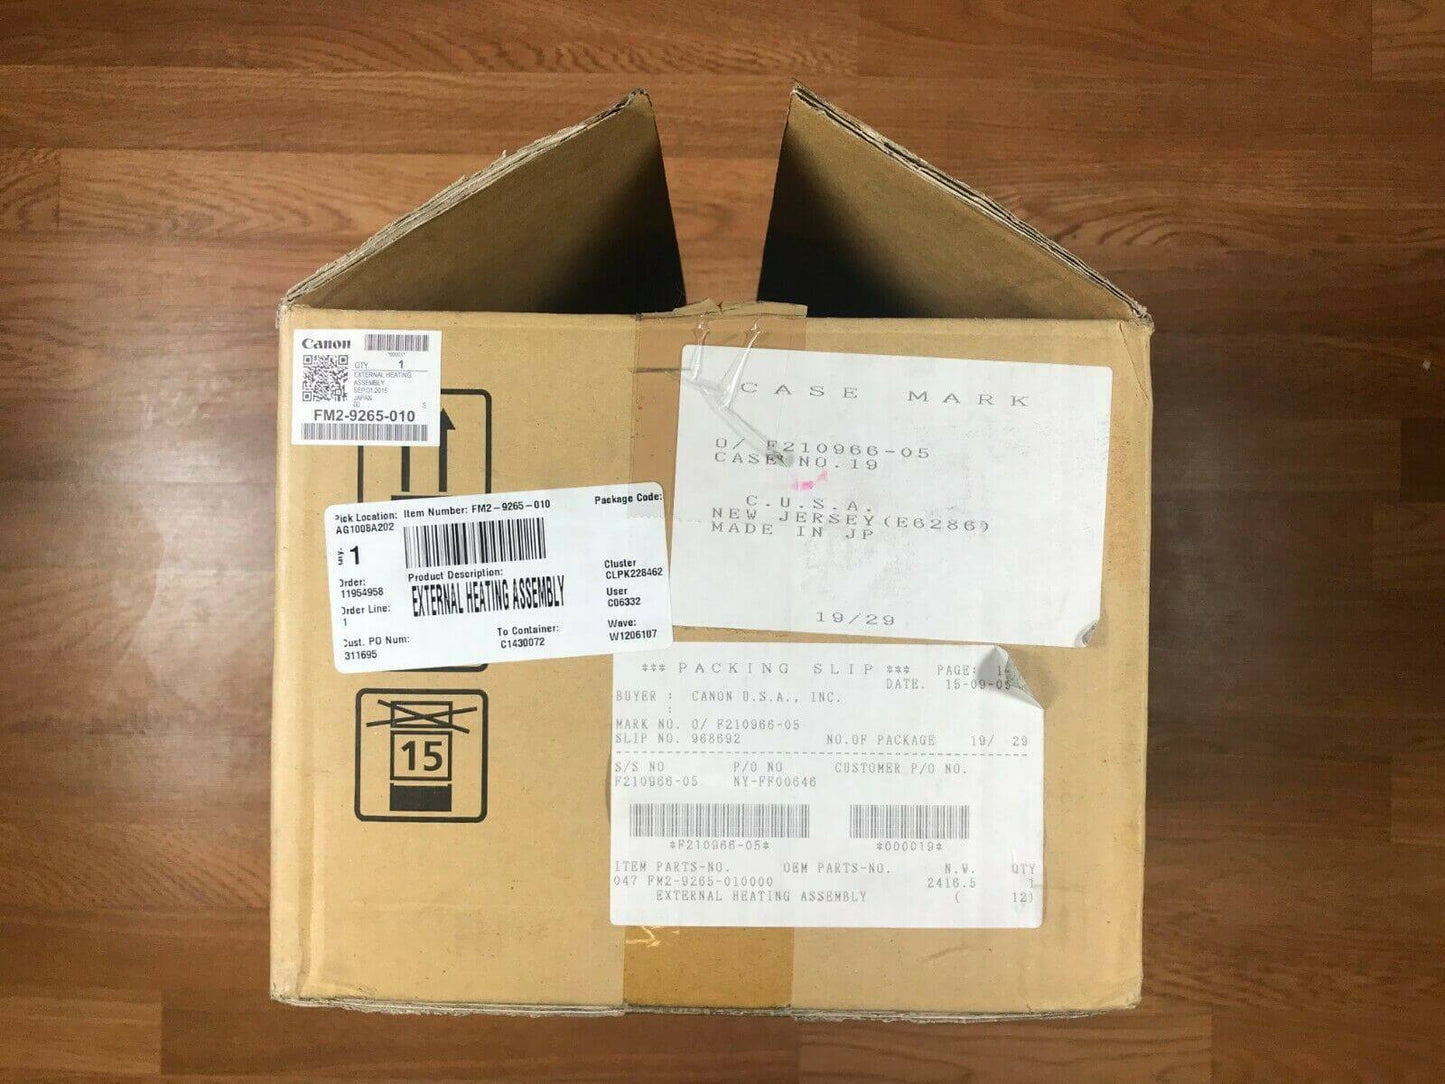 Open Box Canon FM2-9265-010 External Heating Assembly Same Day Shipping!! - copier-clearance-center